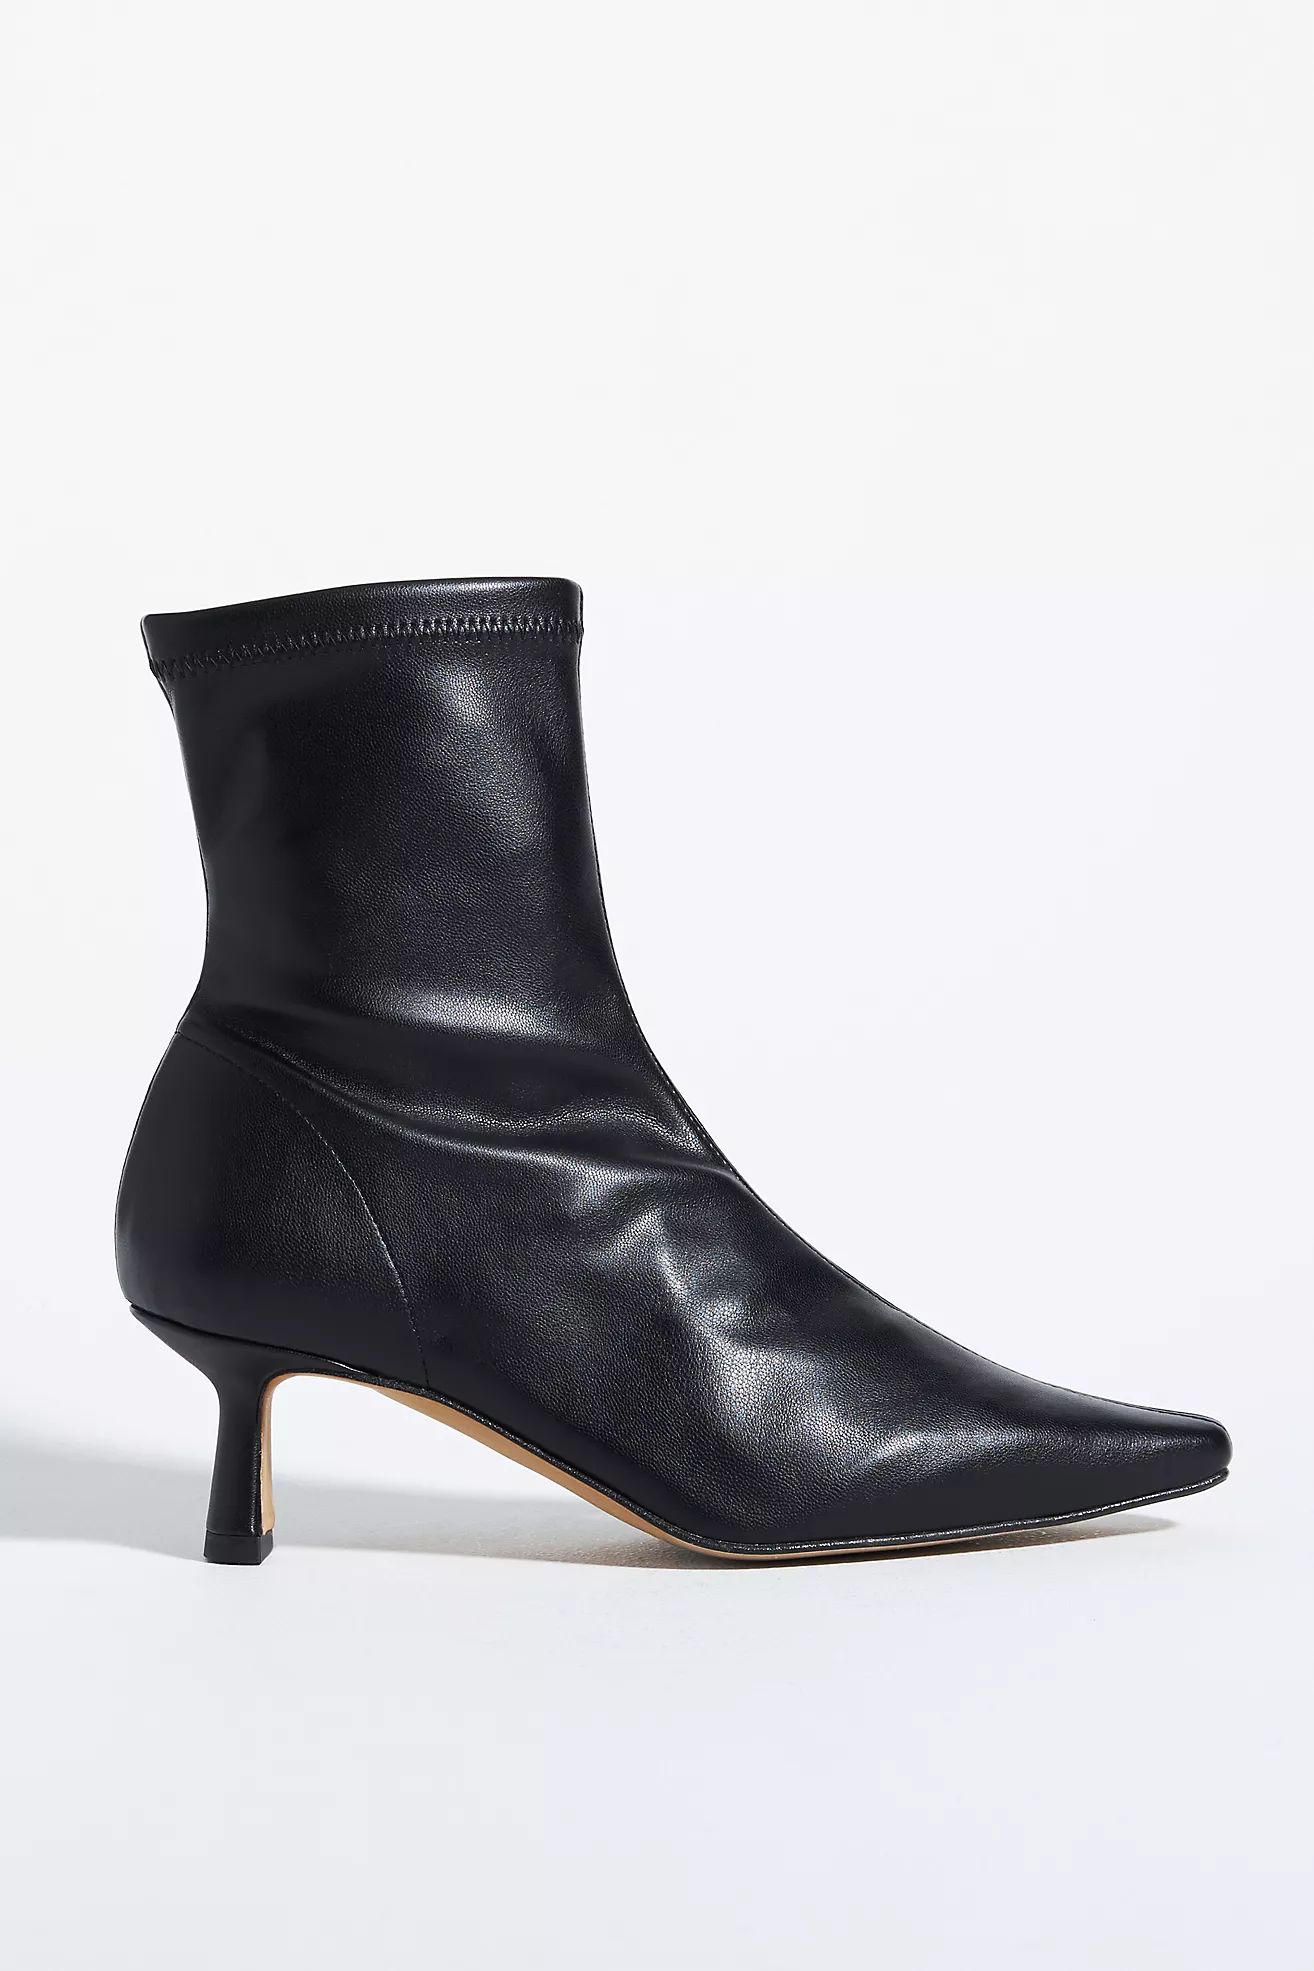 Angel Alarcon Pointed-Toe Boots | Anthropologie (US)